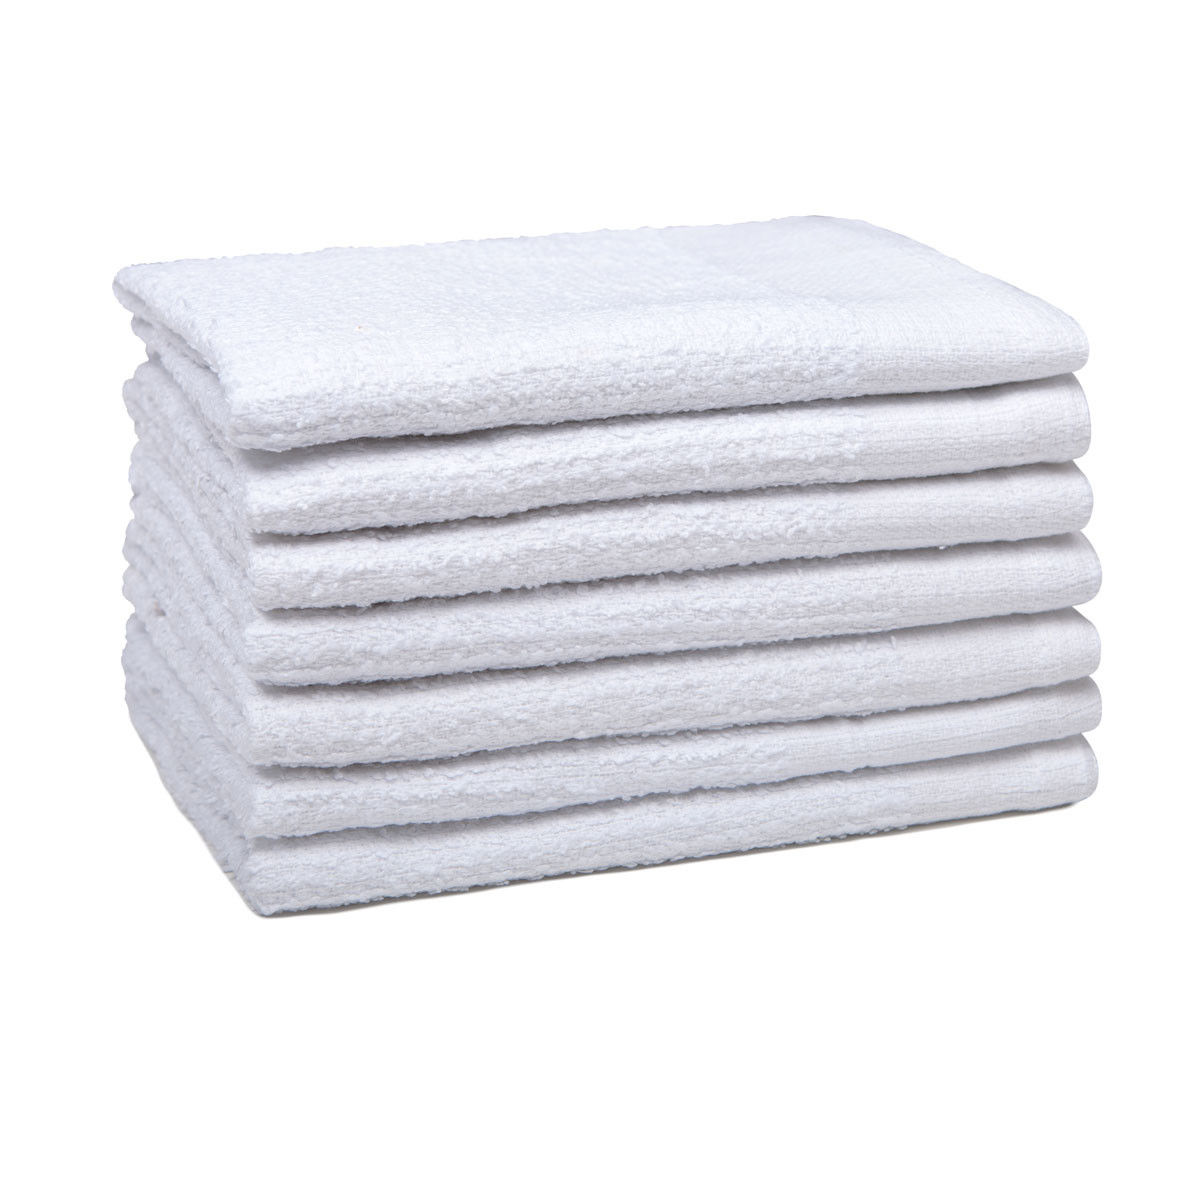 What color choices are offered for the Bar Mop Towels by Intralin?